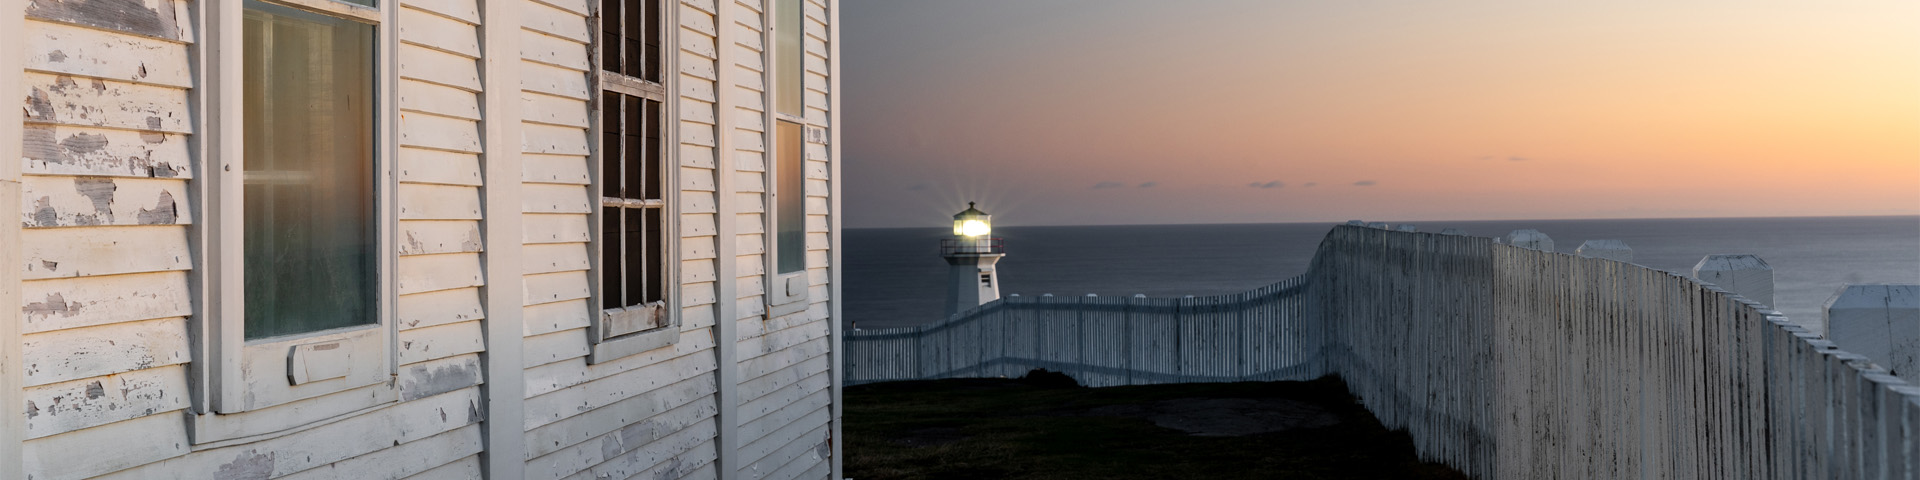 close-up of a white, wooden building overlooking a lighthouse at sunrise.